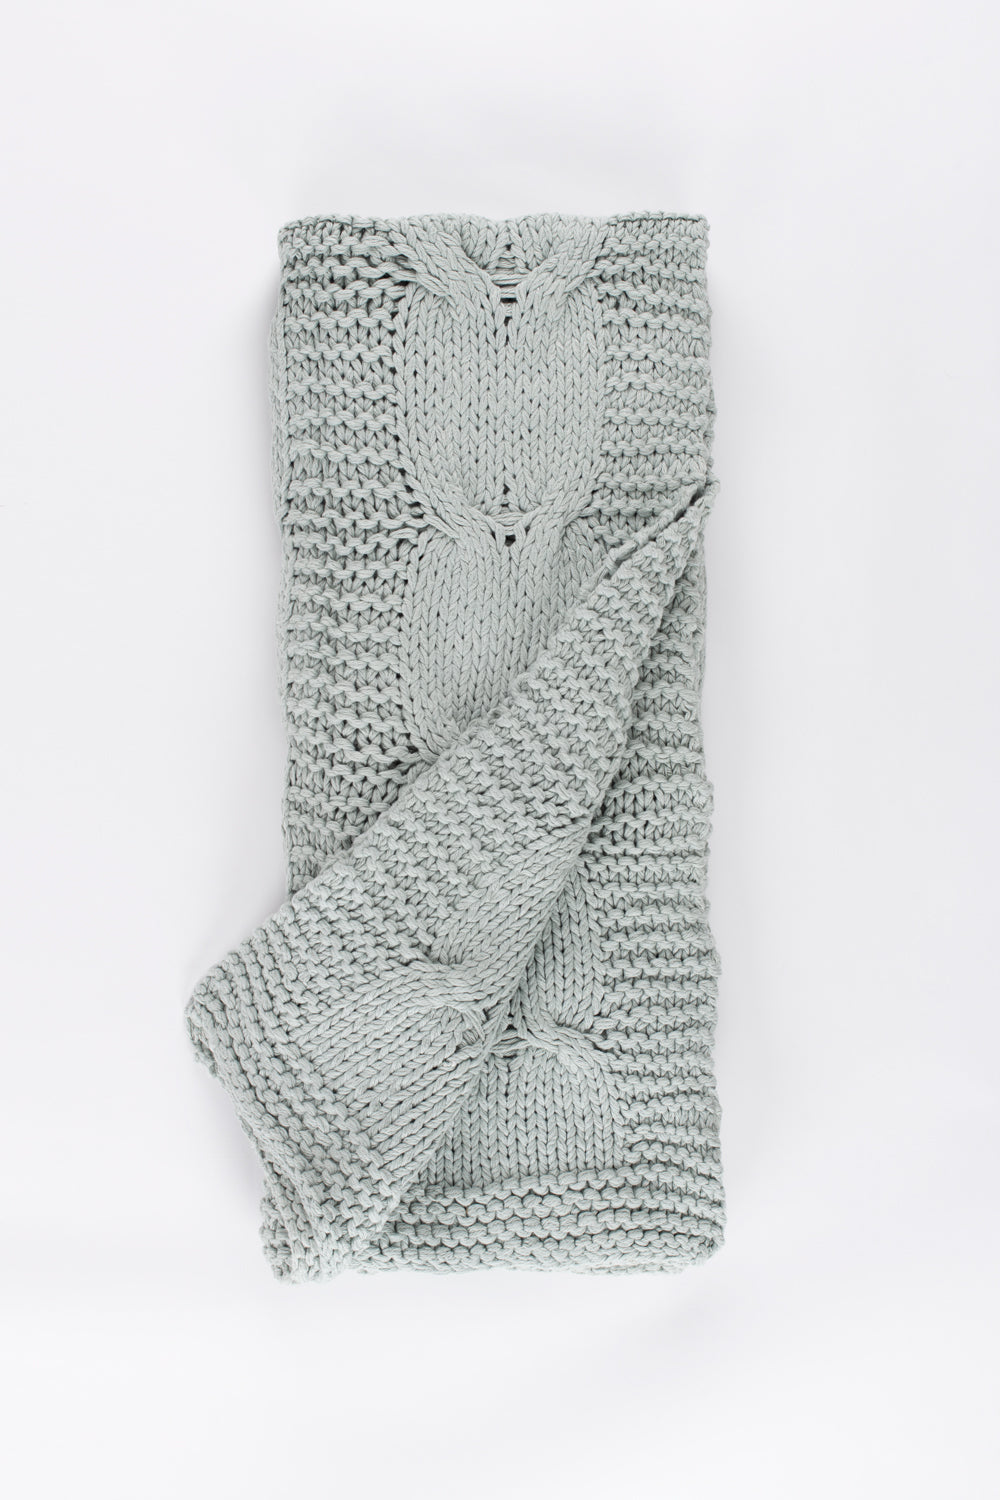 Micah Cable Knitted Throw - Aqua